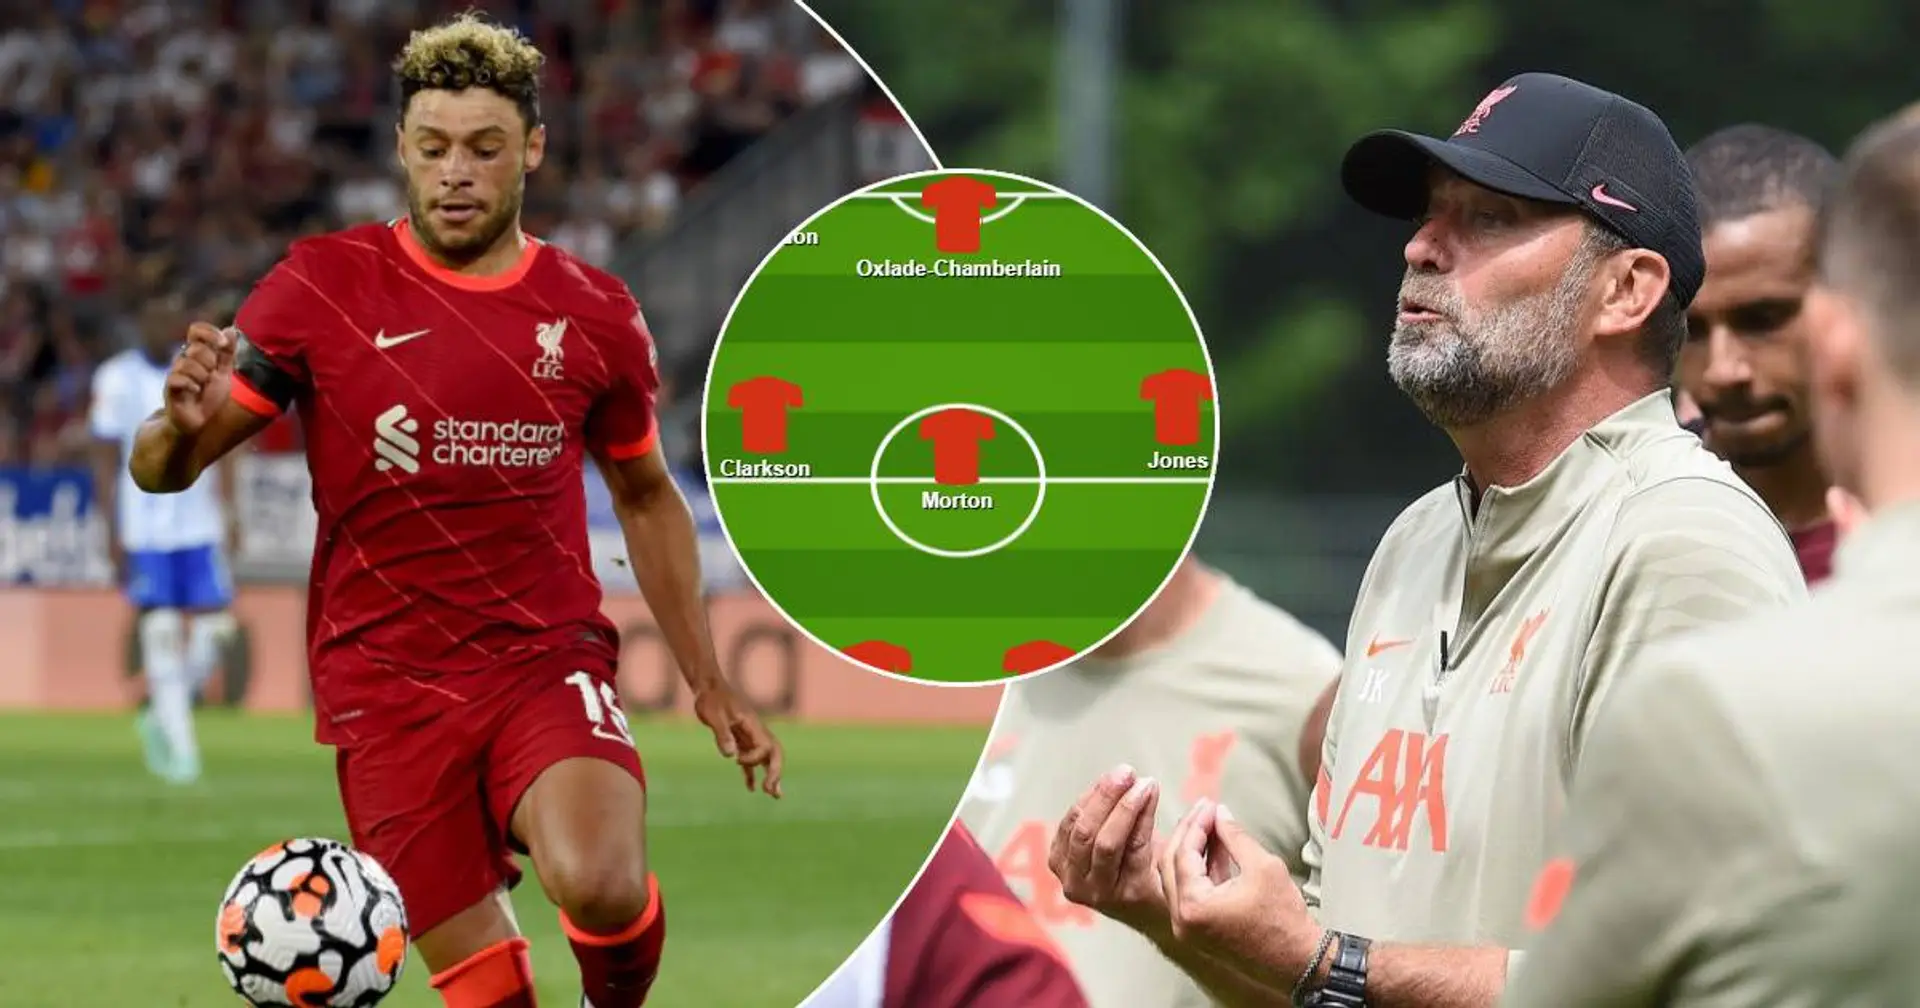 Klopp's formations revealed: How Liverpool lined up in Hertha loss & what lessons manager took away